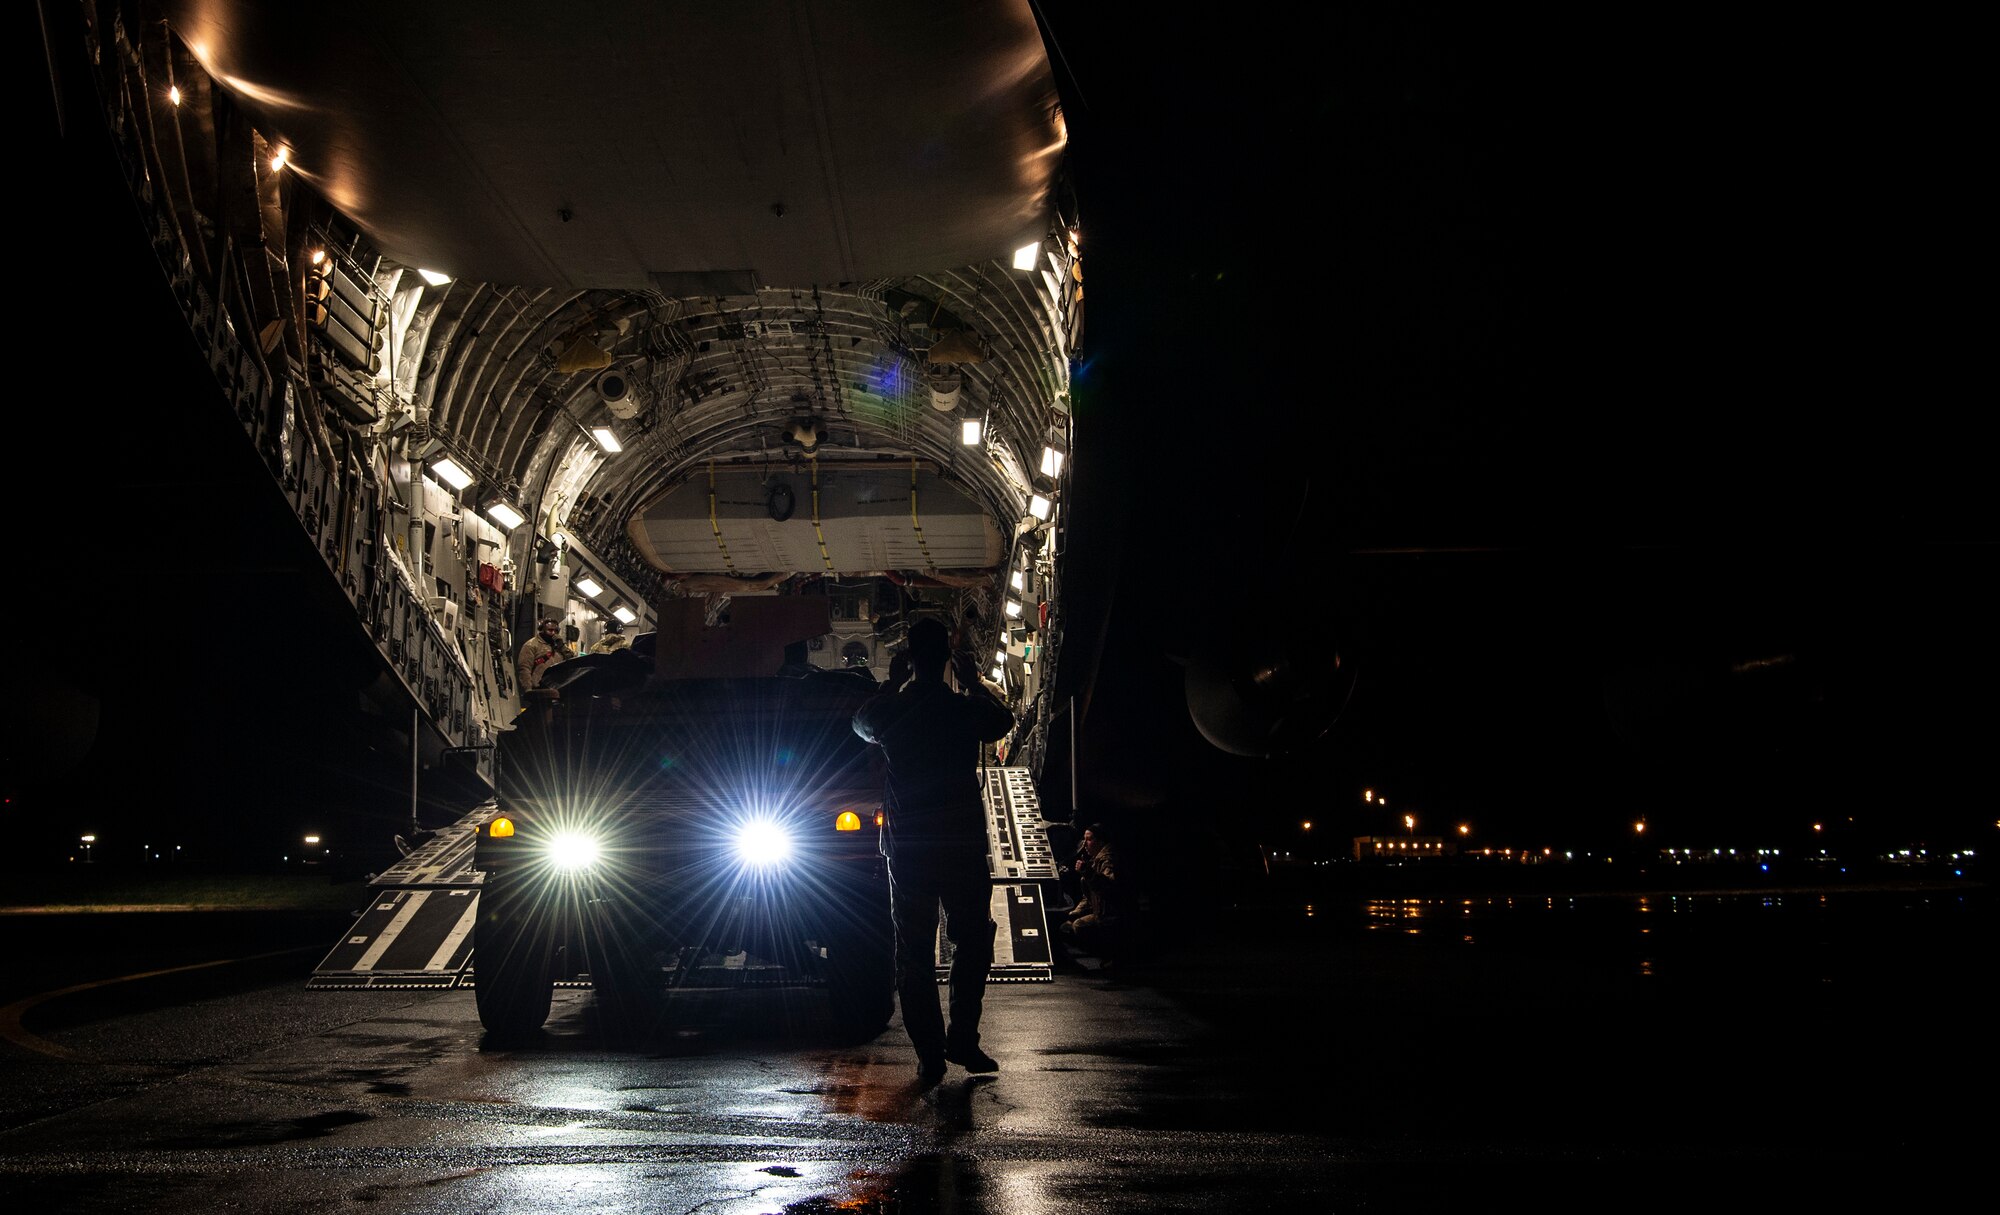 U.S. Air Force Senior Airman Keoni Gibson, 8th Airlift Squadron loadmaster, marshals a U.S. Army HUMVEE onto a C-17 Globemaster III during Exercise Rainier War 21B at Joint Base Lewis-McChord, Washington, Nov. 6, 2021. Rainier War is a semi-annual, large readiness exercise led by 62nd Airlift Wing, designed to train aircrews under realistic scenarios that support a full spectrum readiness operations against modern threats and replicate today’s contingency operations. (U.S. Air Force photo by Staff Sgt. Tryphena Mayhugh)